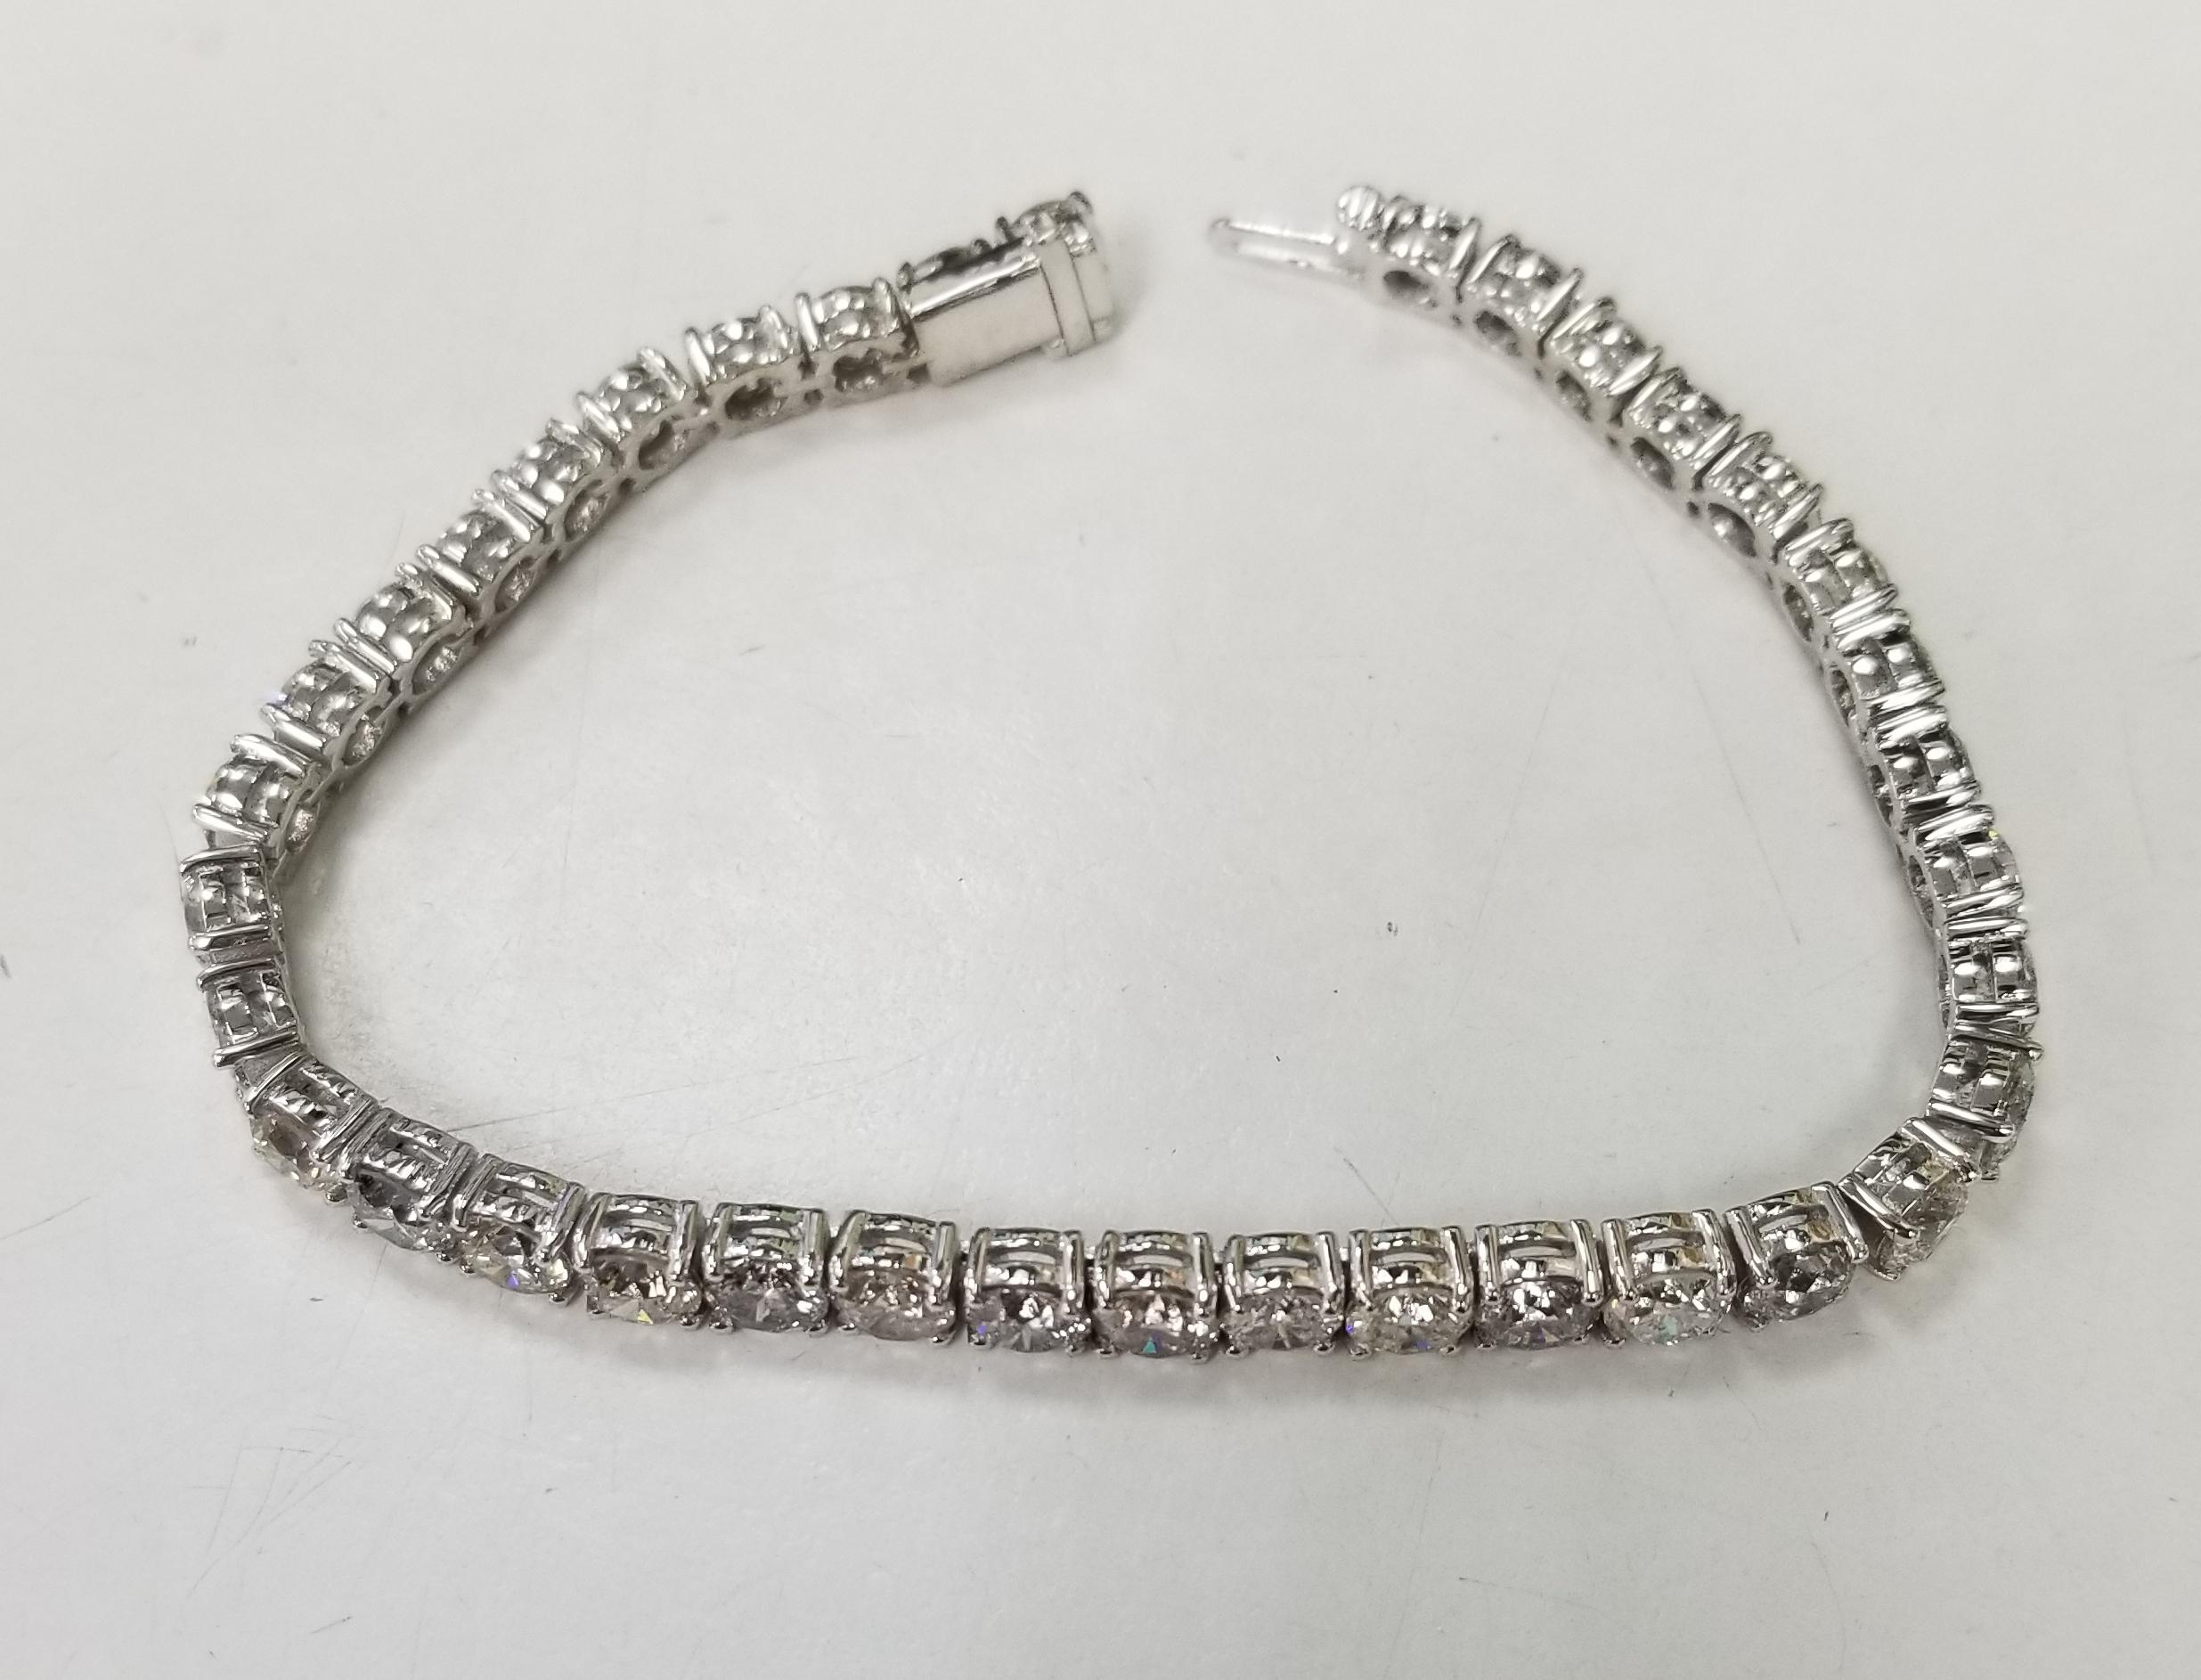 This is very beautiful 14k white gold custom made tennis bracelet with 37 round diamonds color H-I and clarity SI1-2 weighing 15.03cts. very fine quality diamonds, bracelet measures 7 inches with clasp and safety.
Specifications:
    main stone: